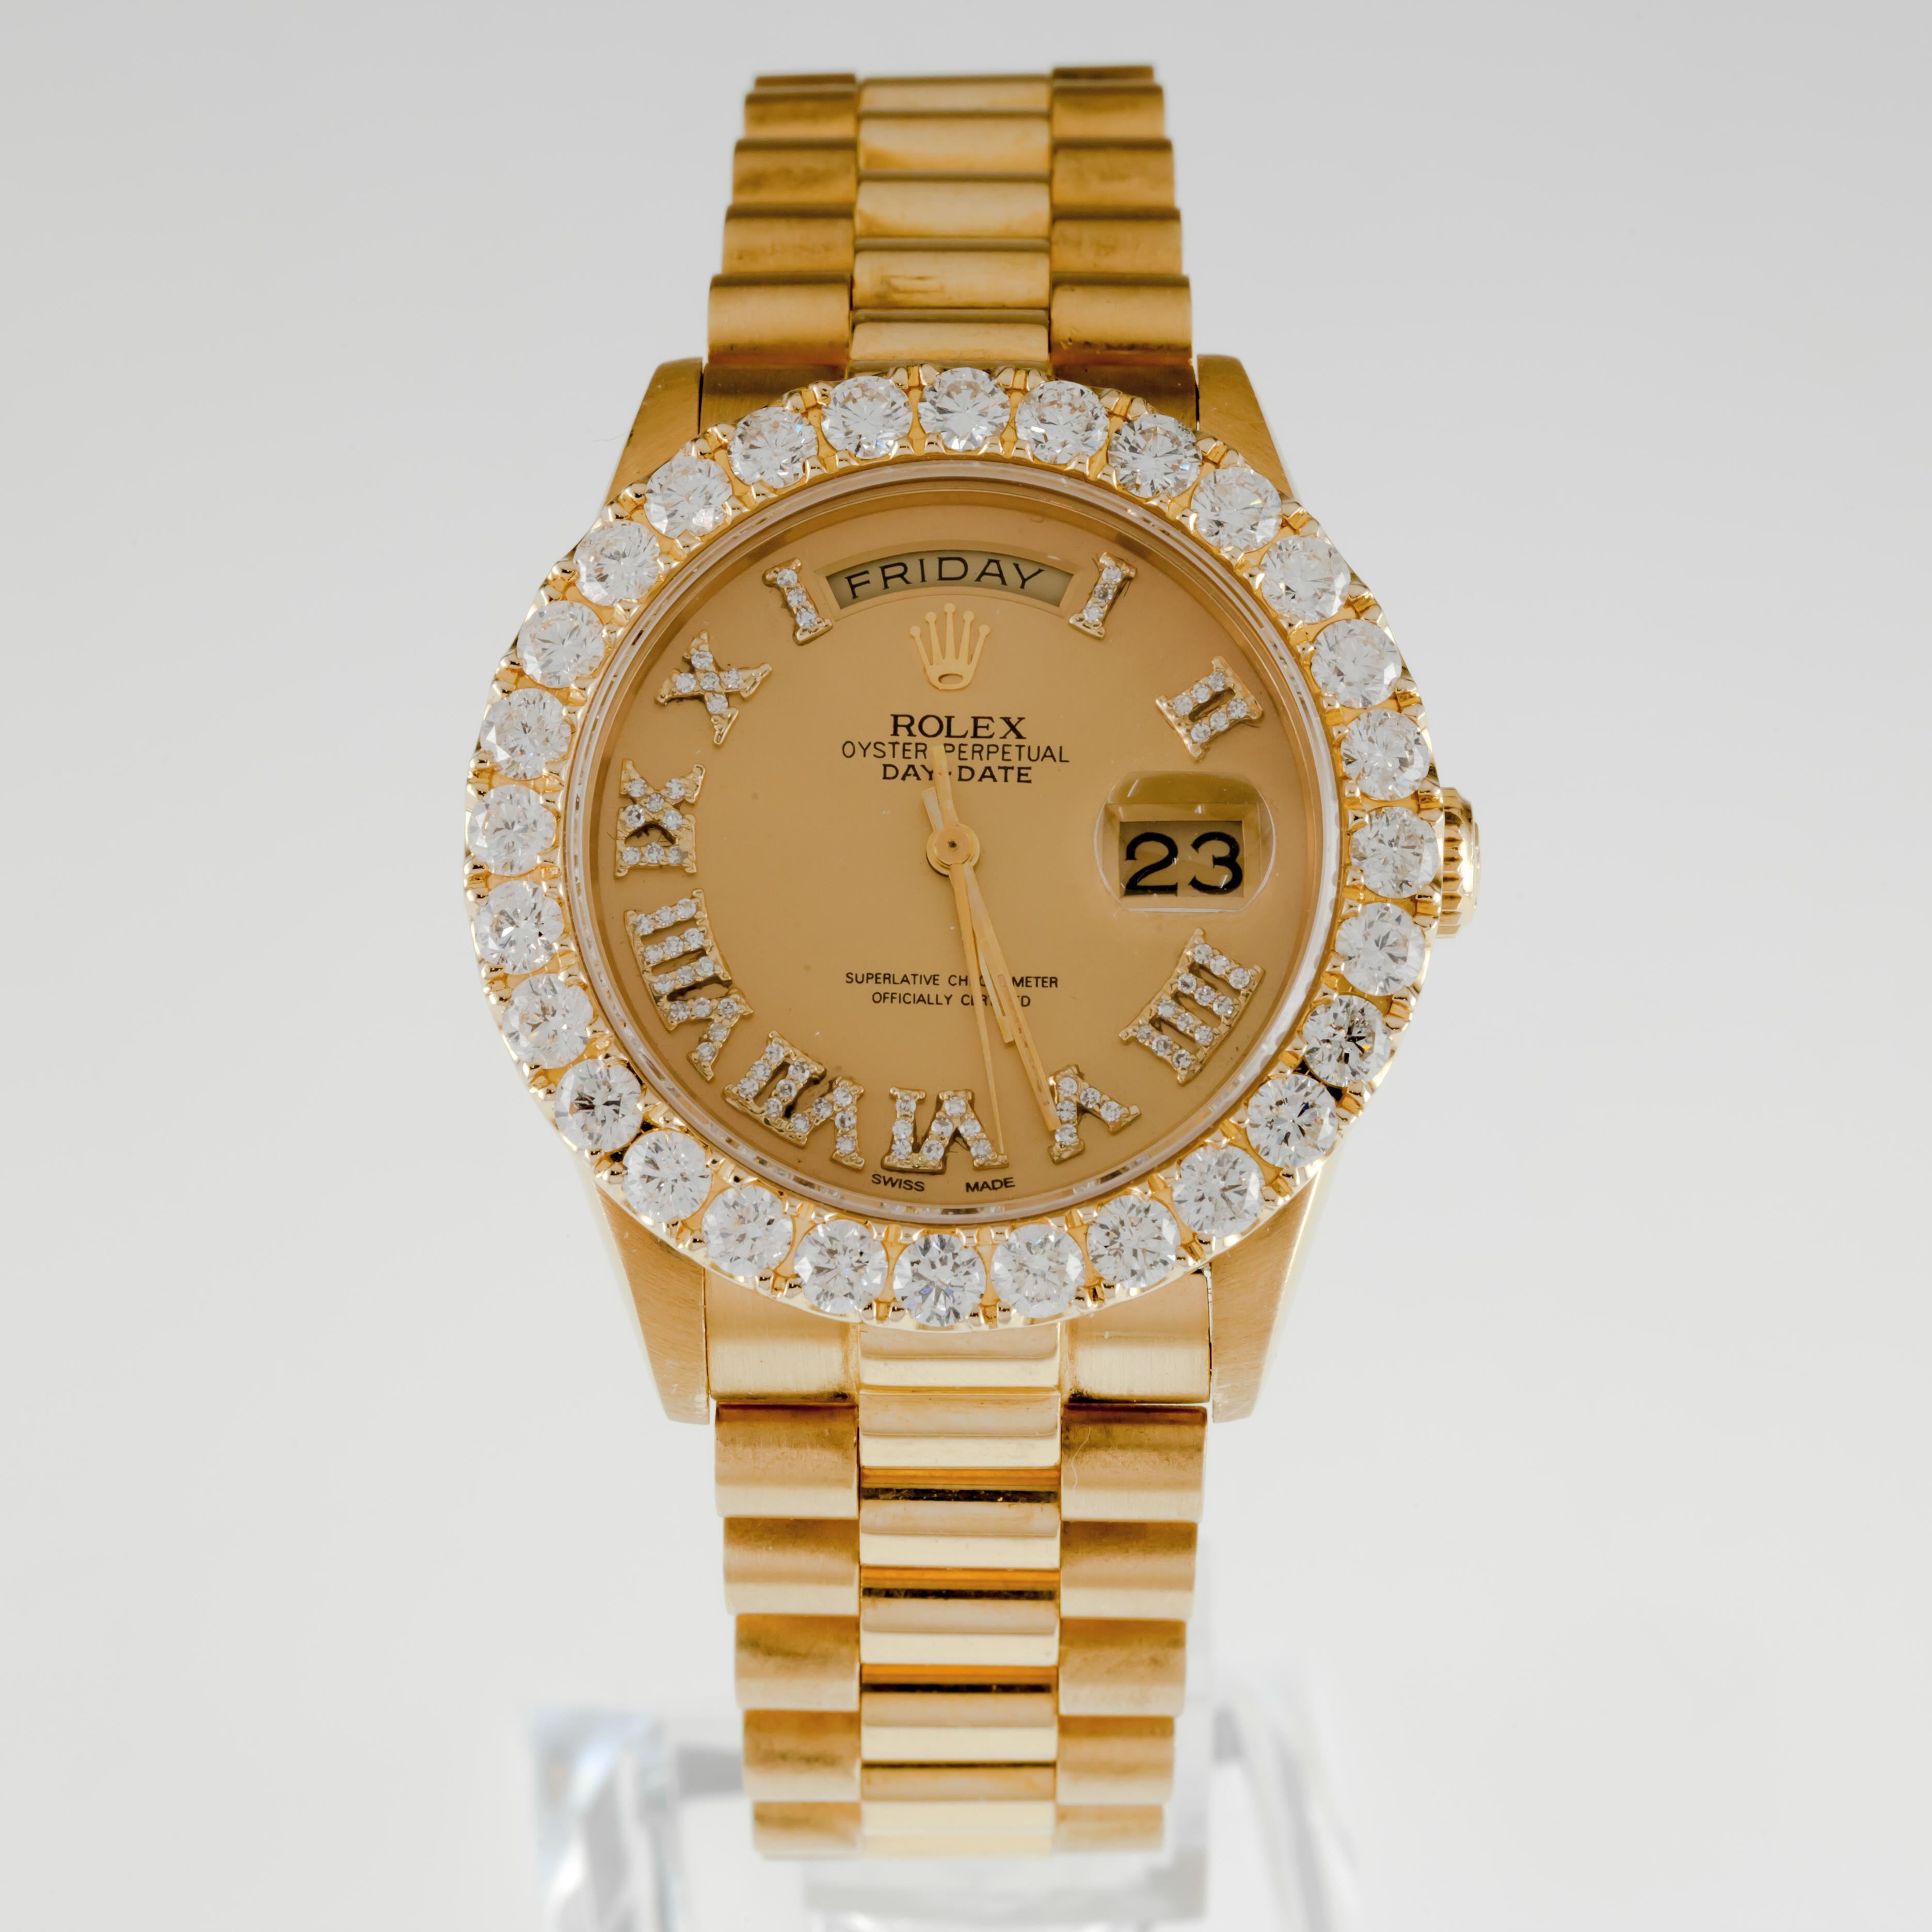 Rolex Men's 18k Yellow Gold President 18038 with Diamond Dial and Bezel
Movement: 3055
Model: 18038
Serial #64799XX
Year: 1980
18k Yellow Gold Case w/ Diamond Bezel
Appx 5 Cts, G - H Color, SI Clarity on Average
36 mm in Diameter (39 mm w/